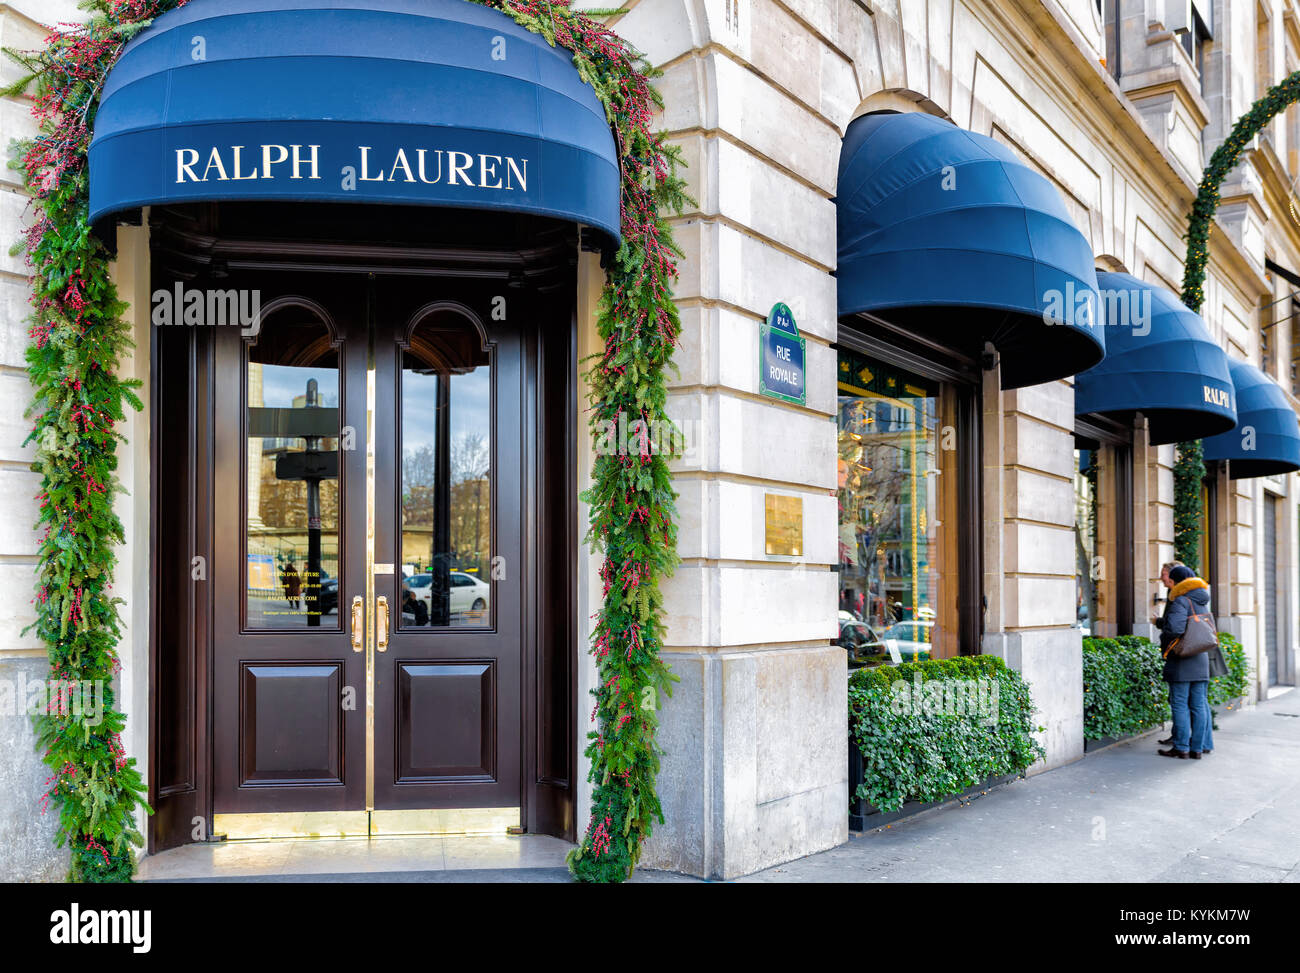 Paris, France, Ralph Lauren's first store here opened 1986 in the posh shopping district near the Place de la Madeleine, shown decorated for Christmas Stock Photo